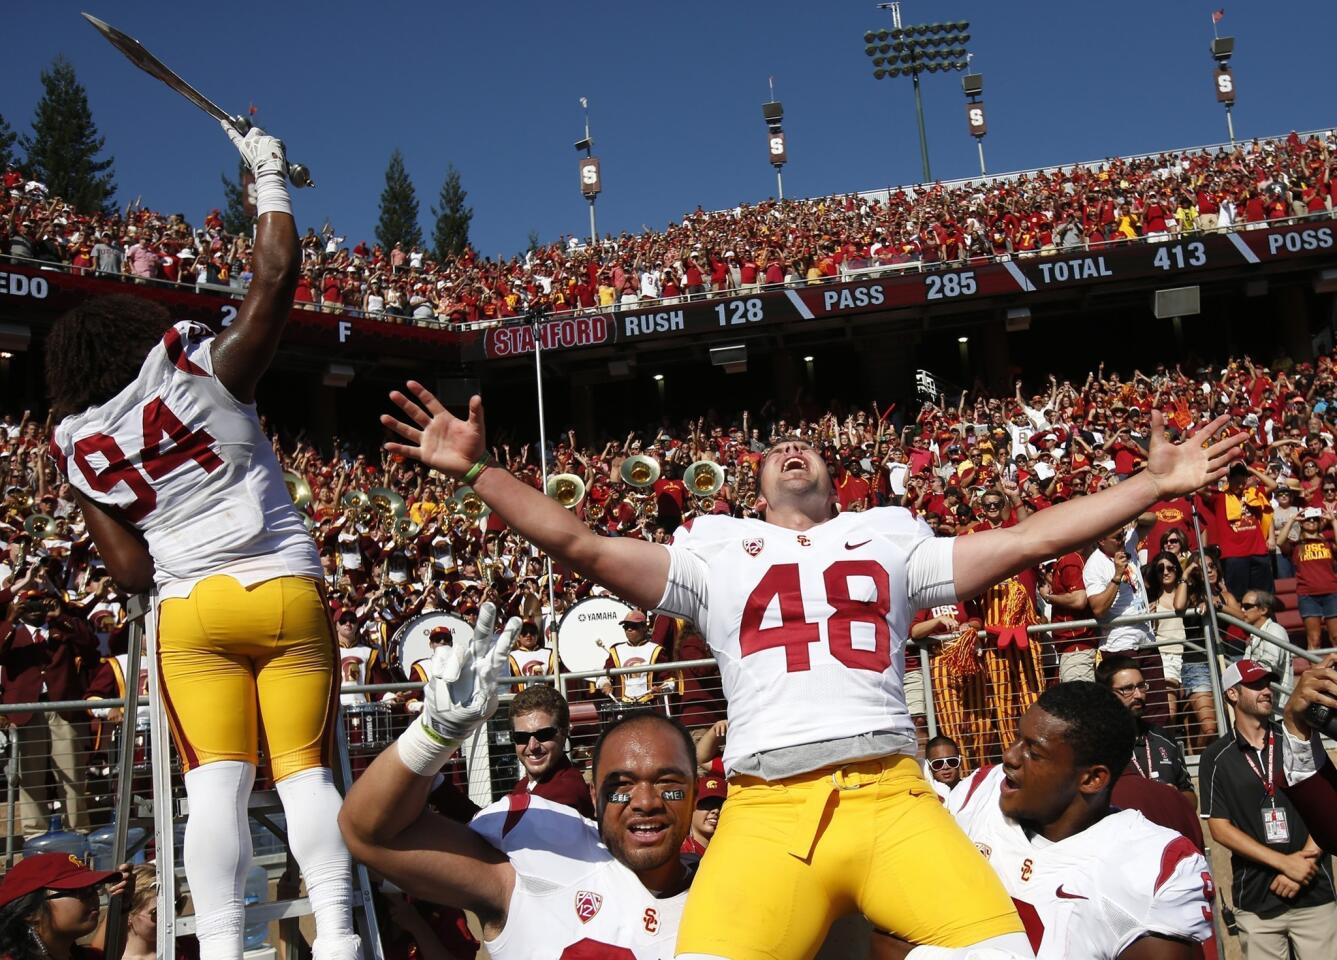 USC kicker Andre Heidari, right, celebrates with teammates Soma Vainuku, left, and Juju Smith as defensive end Leonard Williams leads the band following the Trojans' 13-10 win over Stanford on Saturday.